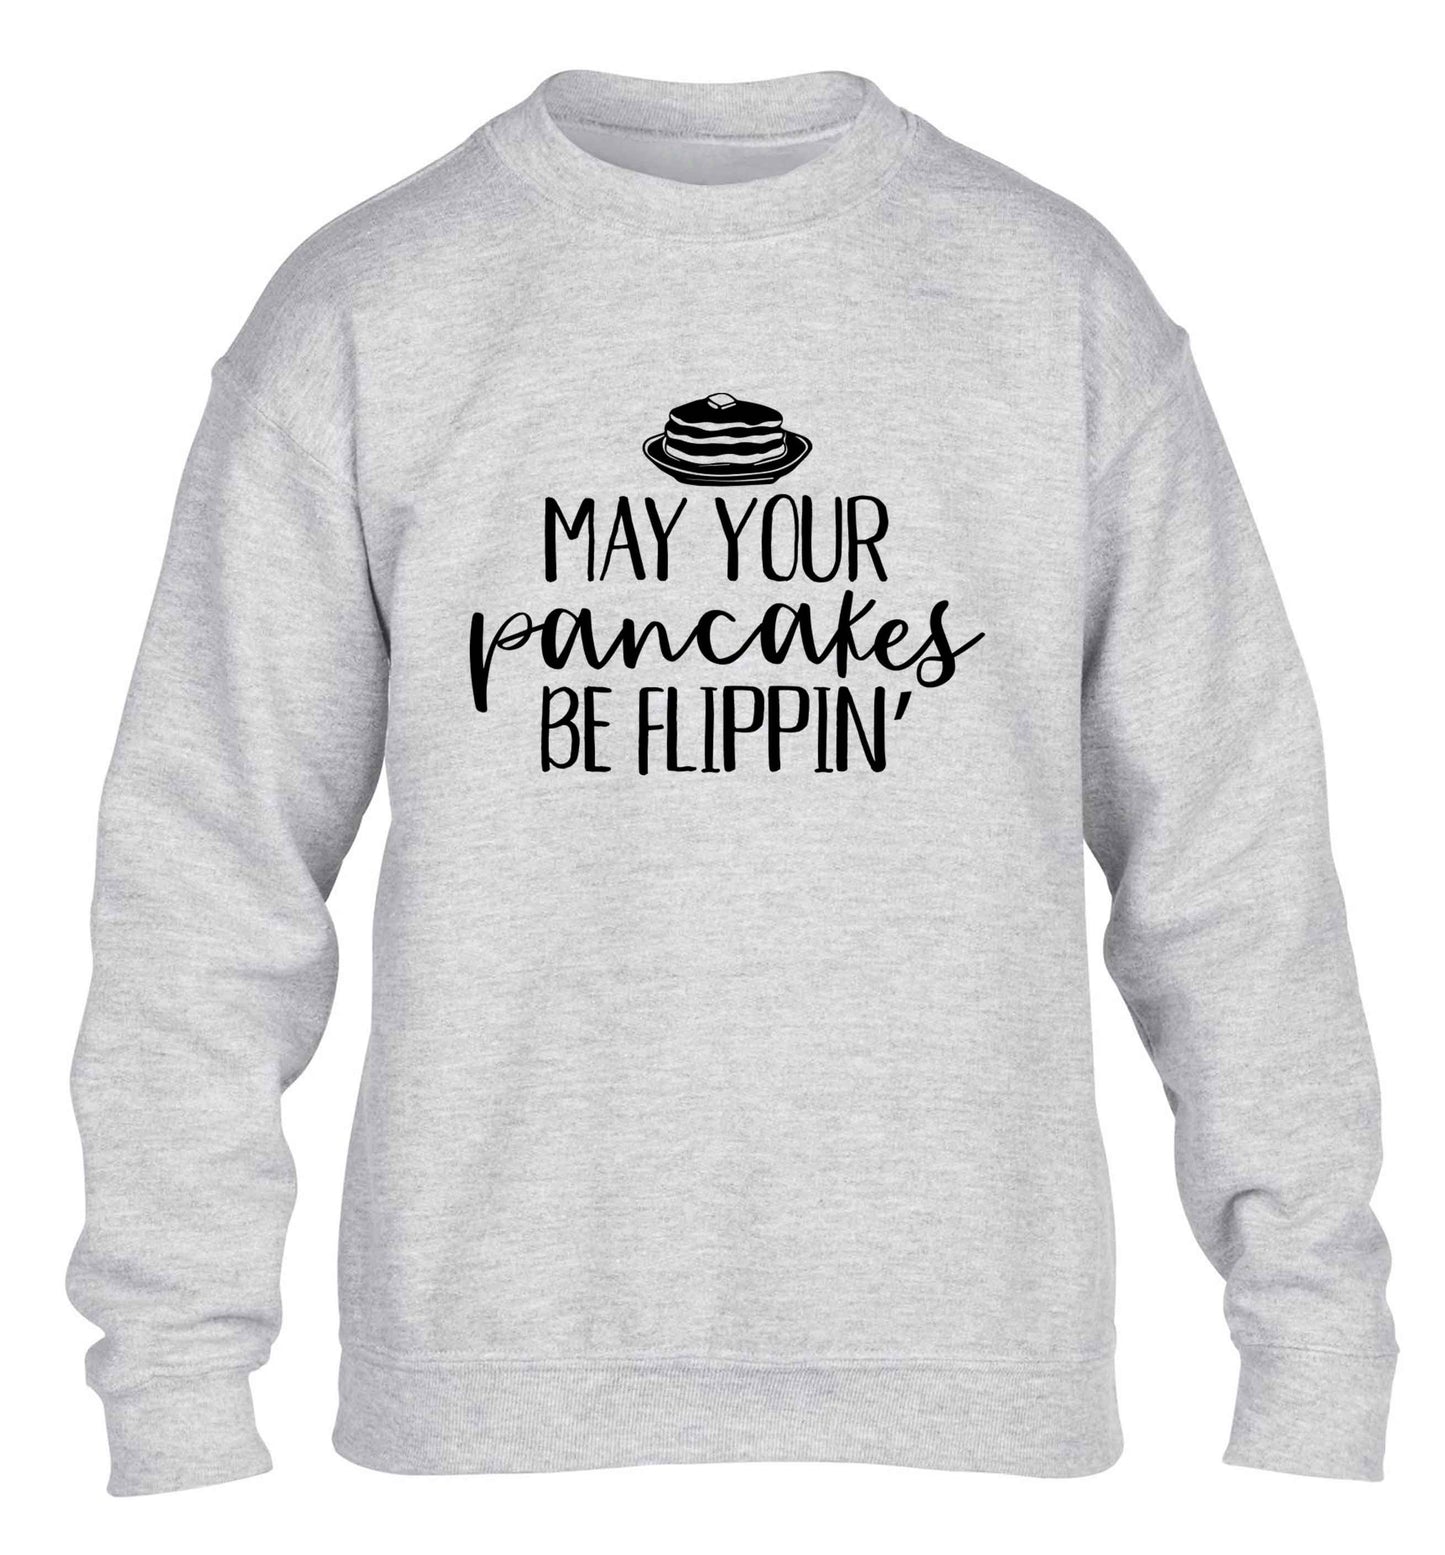 May your pancakes be flippin' children's grey sweater 12-13 Years